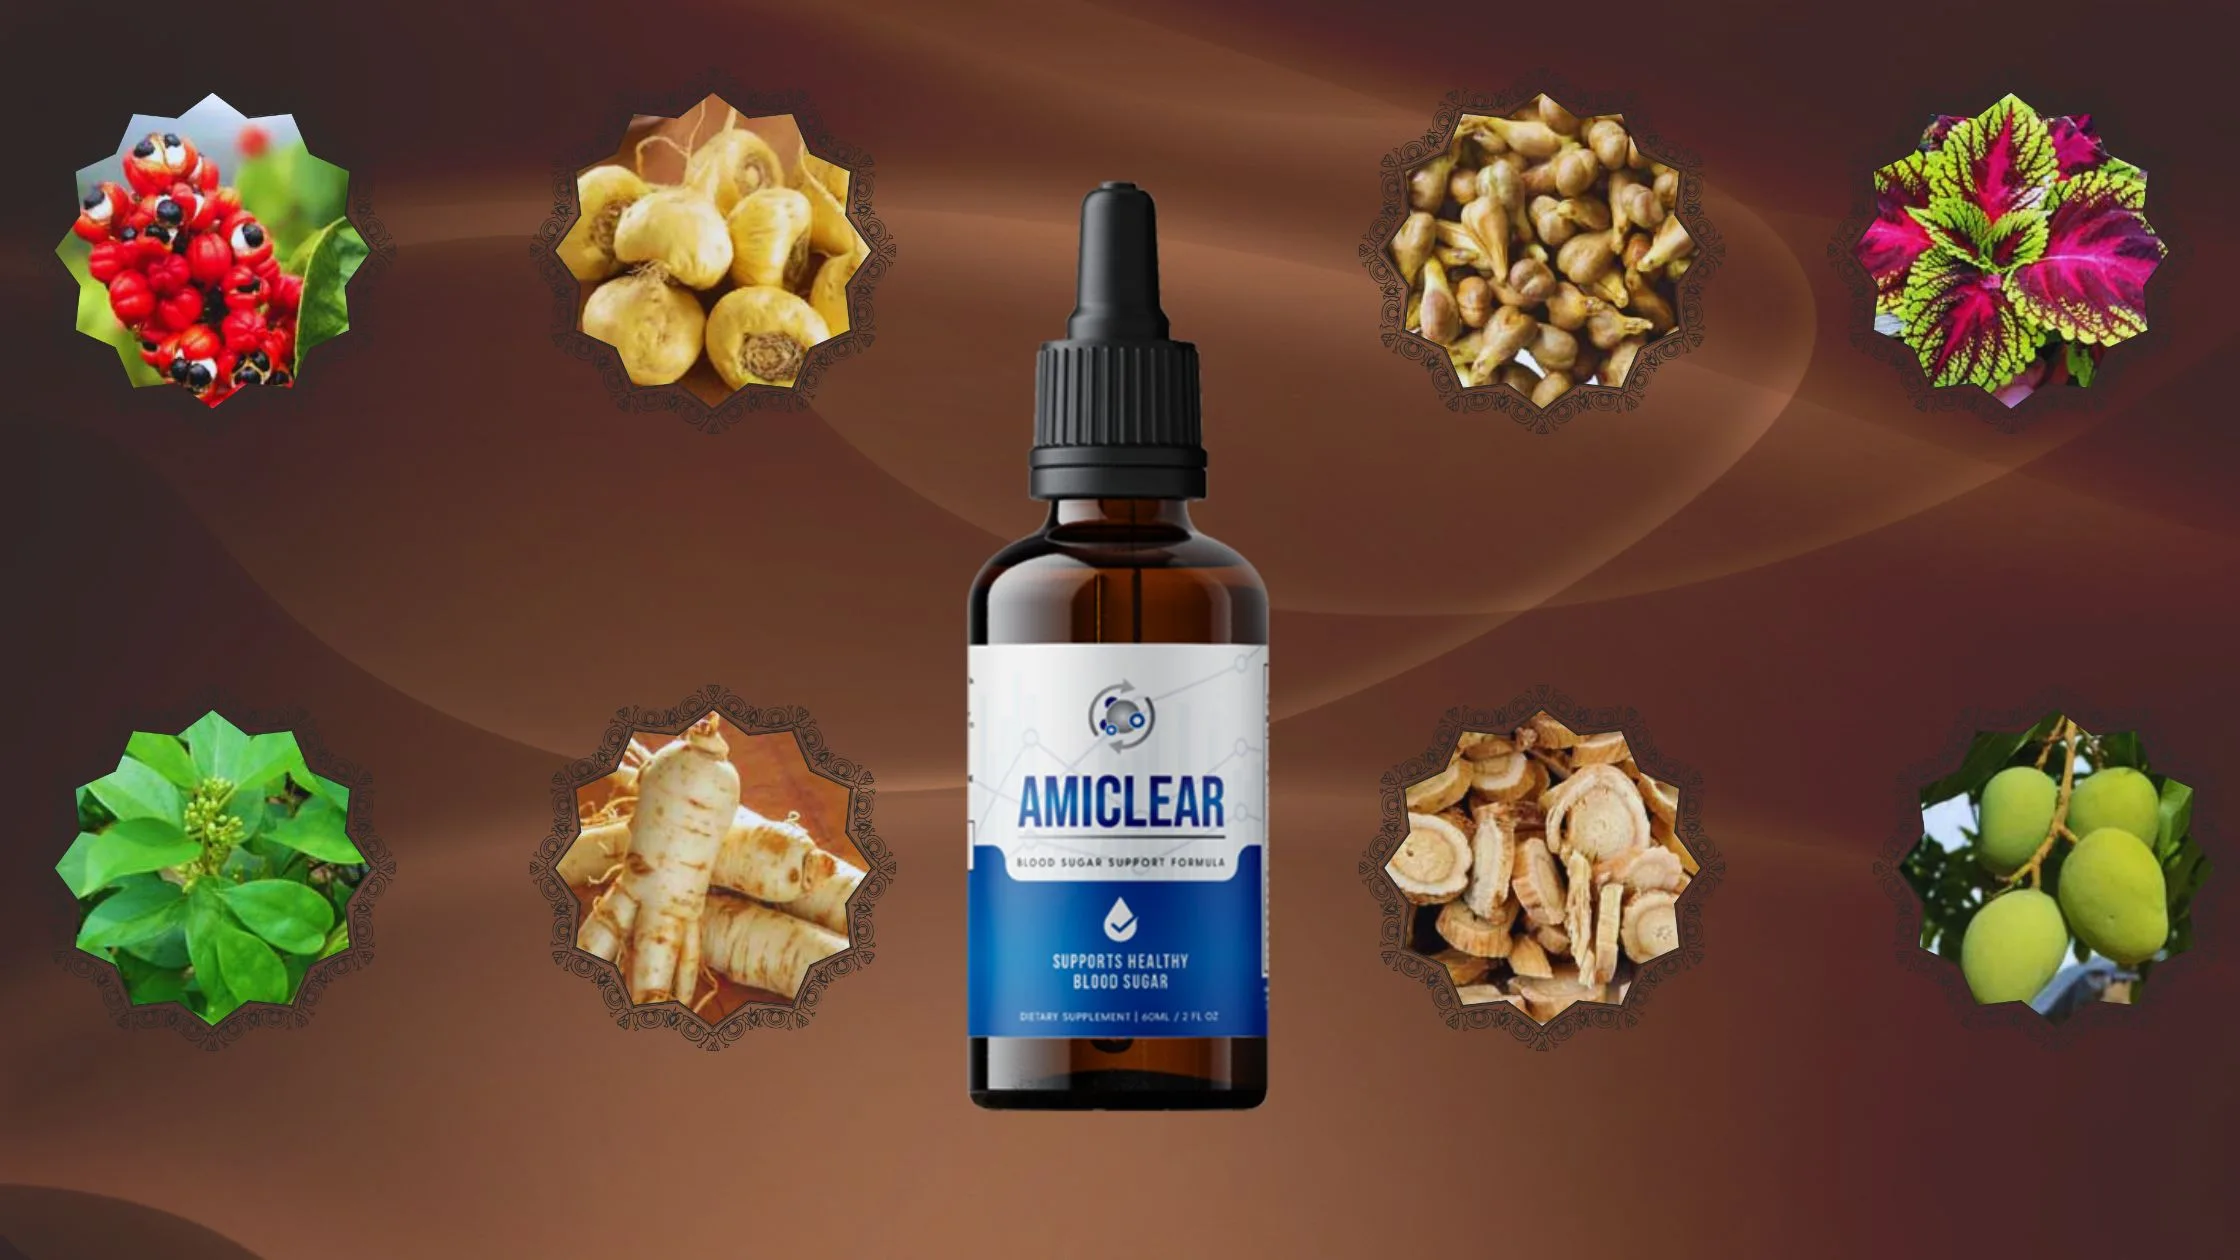 Amiclear ingredients